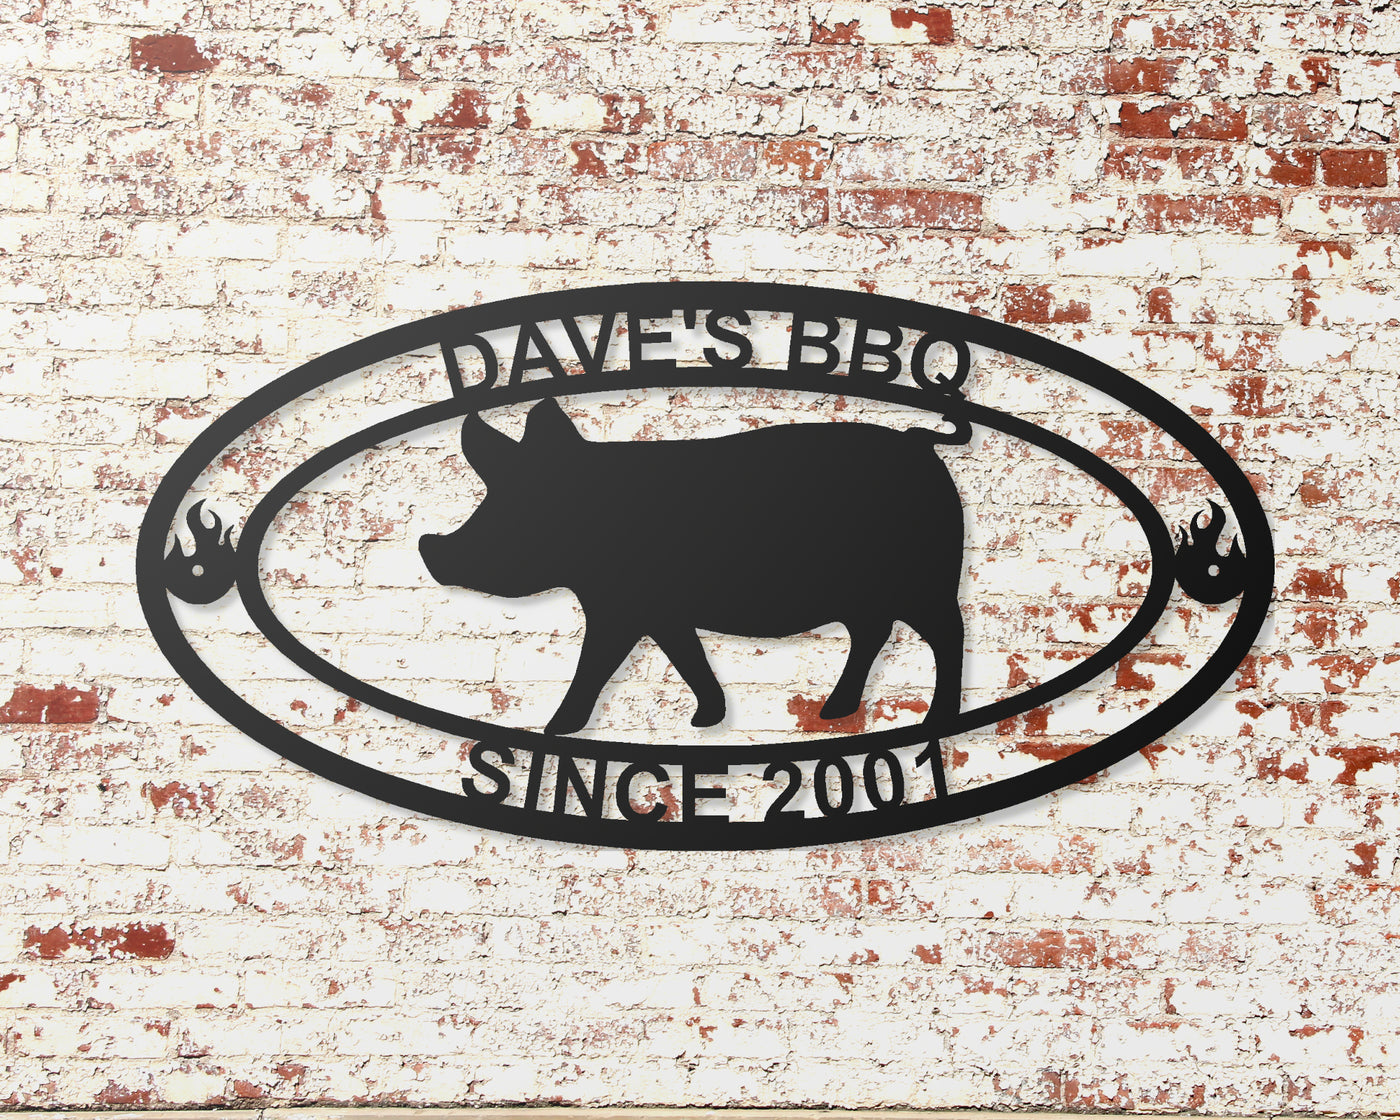 Personalized BBQ Metal Sign with Pig - Madison Iron and Wood - Personalized sign - metal outdoor decor - Steel deocrations - american made products - veteran owned business products - fencing decorations - fencing supplies - custom wall decorations - personalized wall signs - steel - decorative post caps - steel post caps - metal post caps - brackets - structural brackets - home improvement - easter - easter decorations - easter gift - easter yard decor